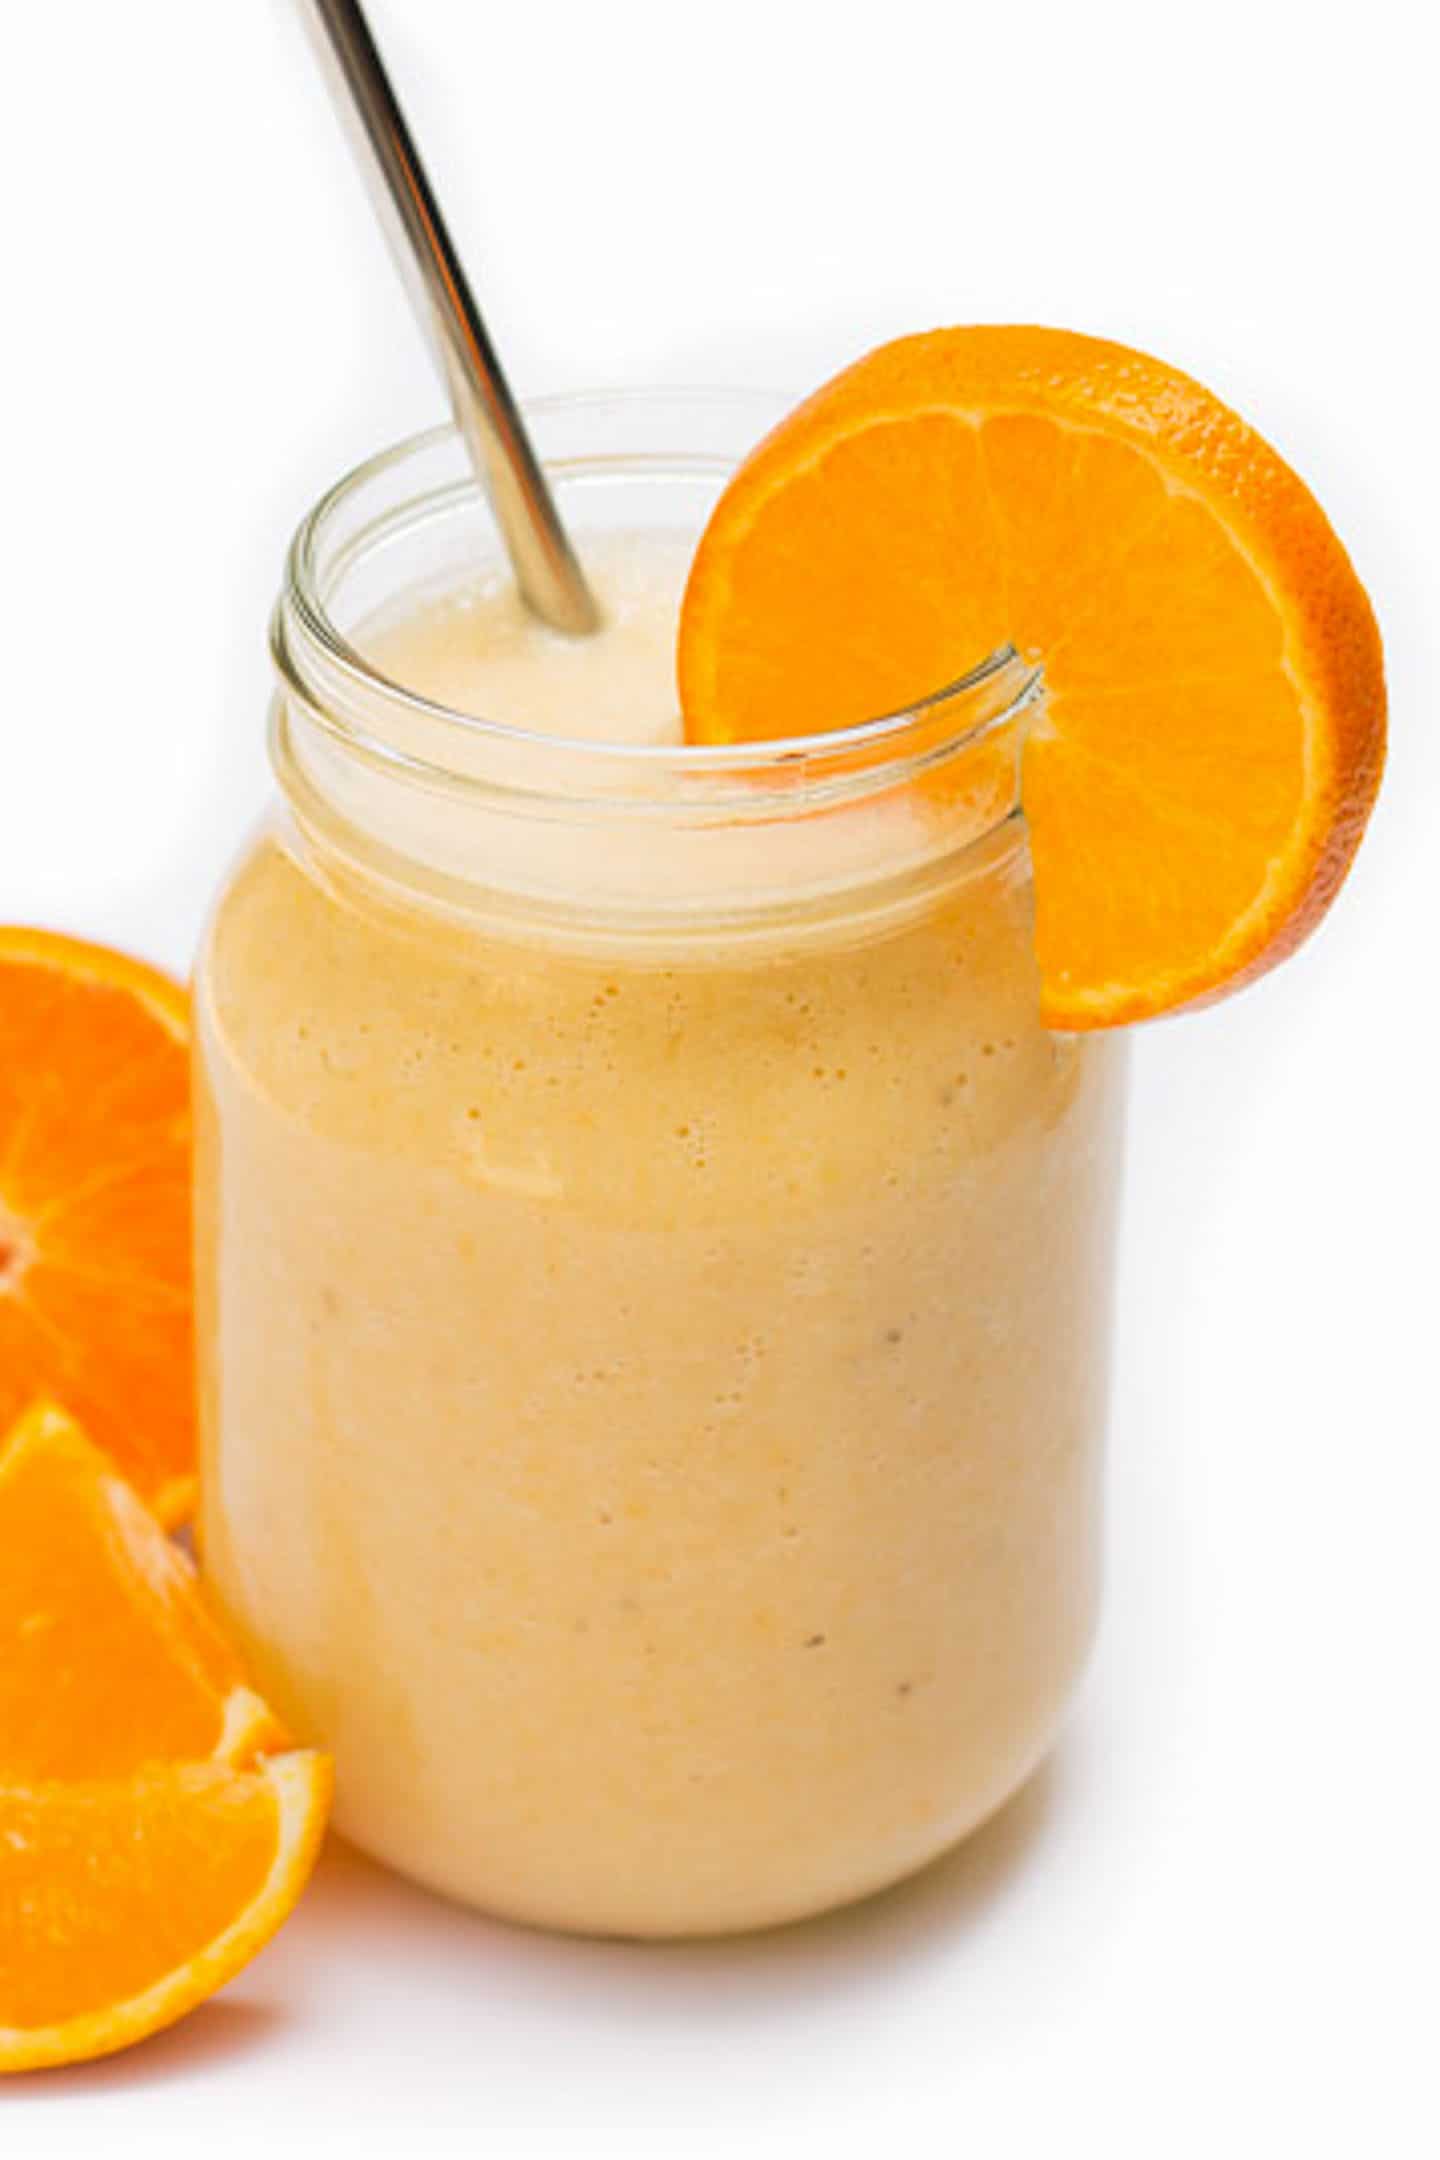 Orange Banana Smoothie with a metal straw.